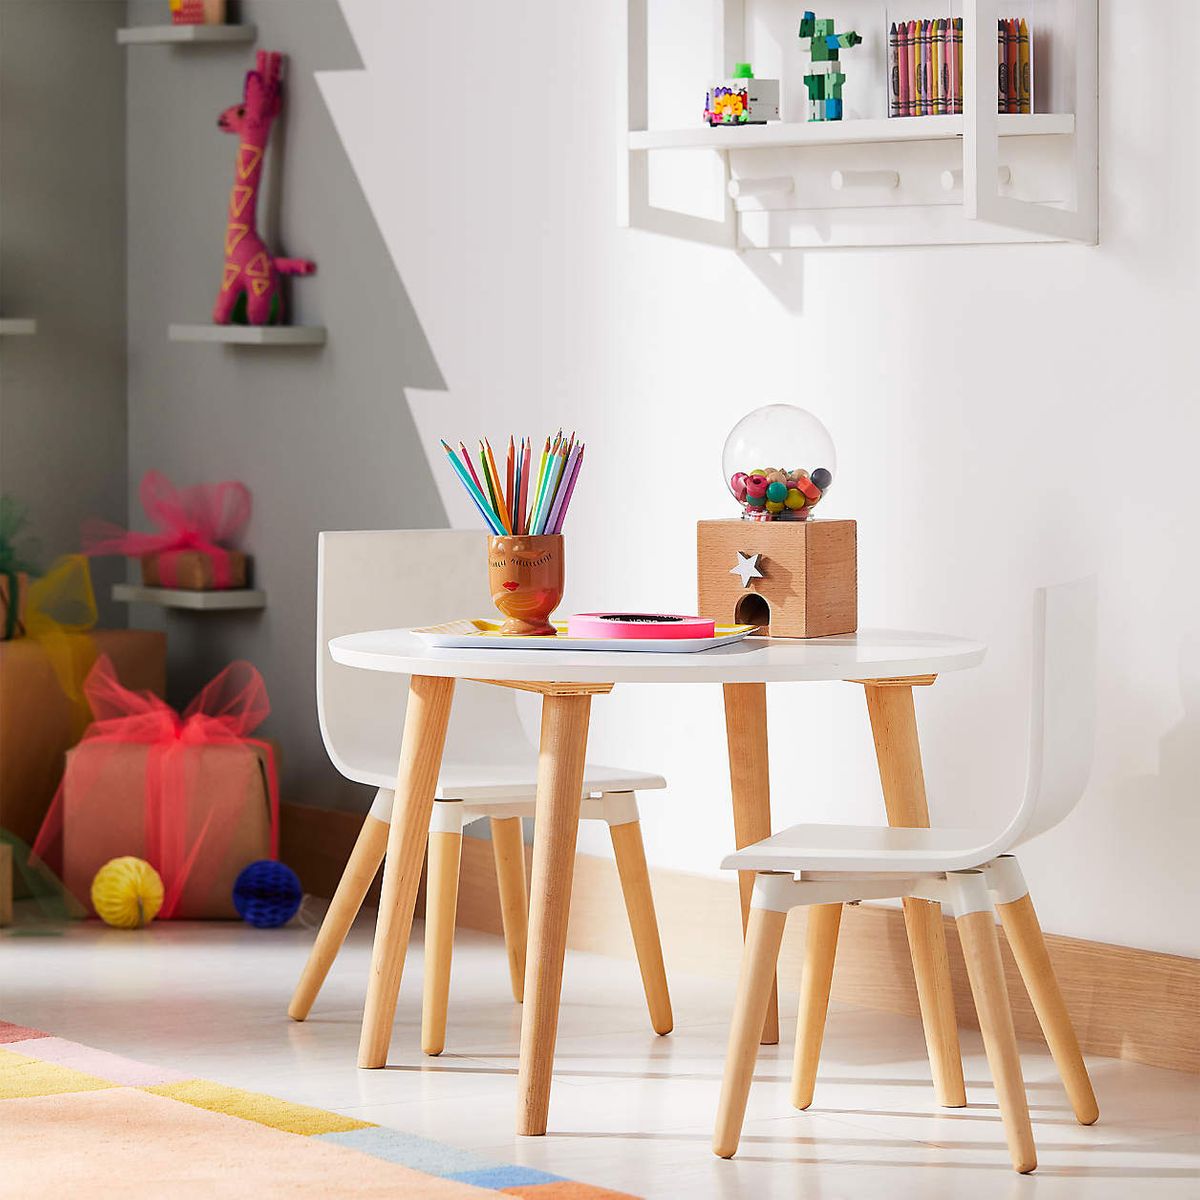 Kids Children Table And 2 Chairs Set For Boys & Girls for Home Studying Playing 